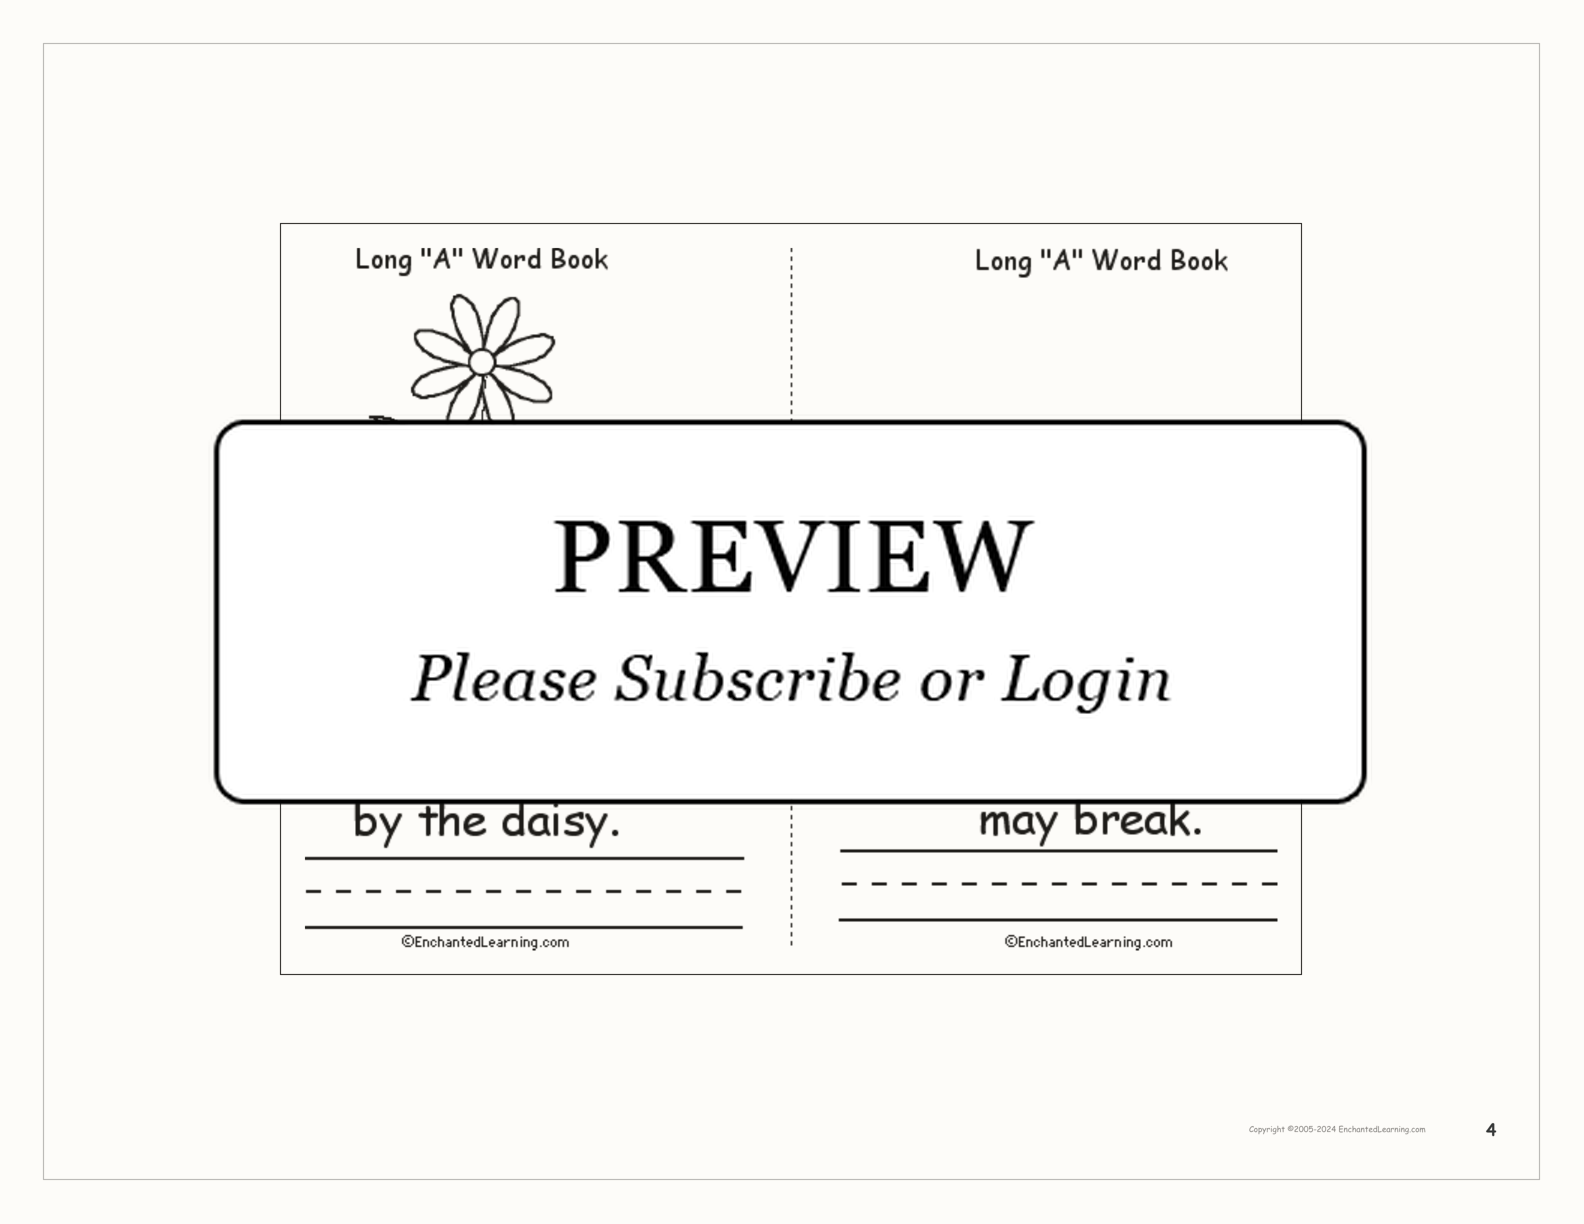 Long 'A' Words Book interactive printout page 4